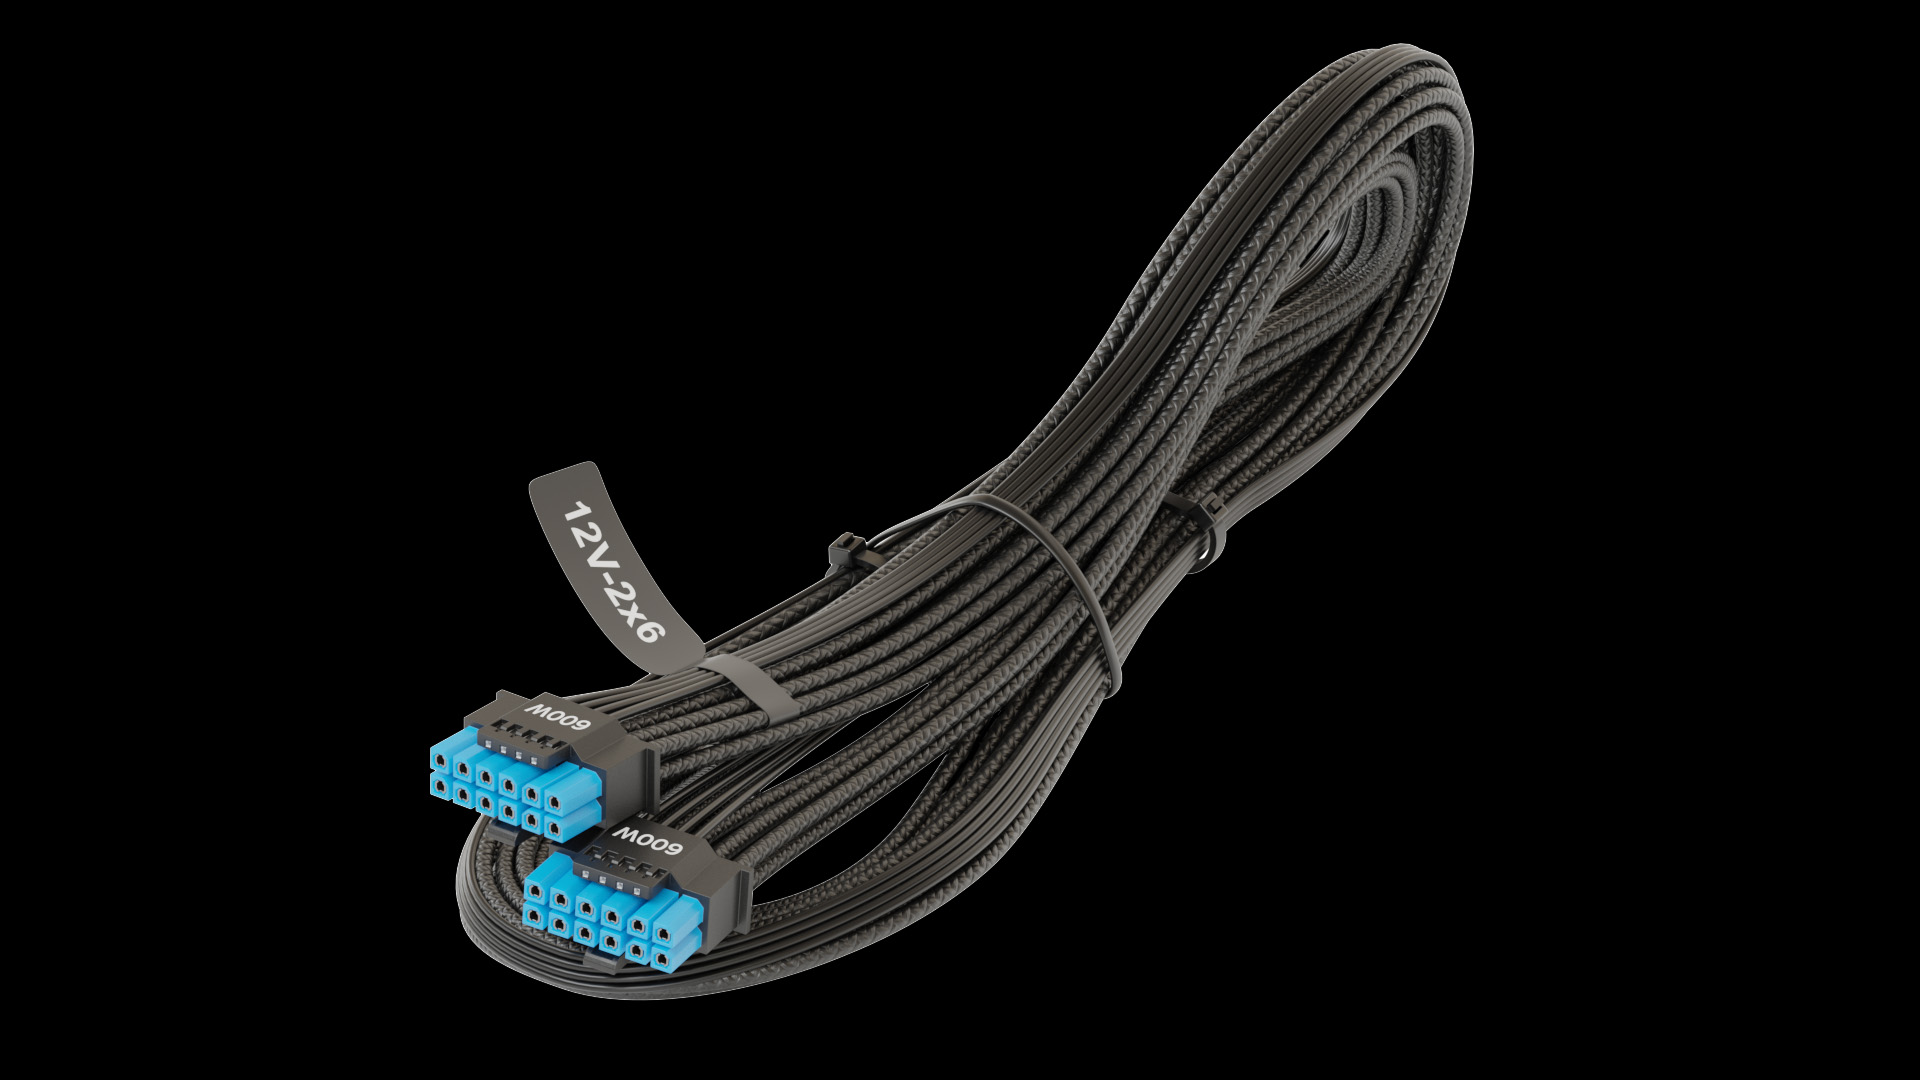 Seasonic unveils 600W 12V-2X6 GPU power cable upgrade — company’s earlier ATX 3.0 PSUs came with older 12VHPWR cables